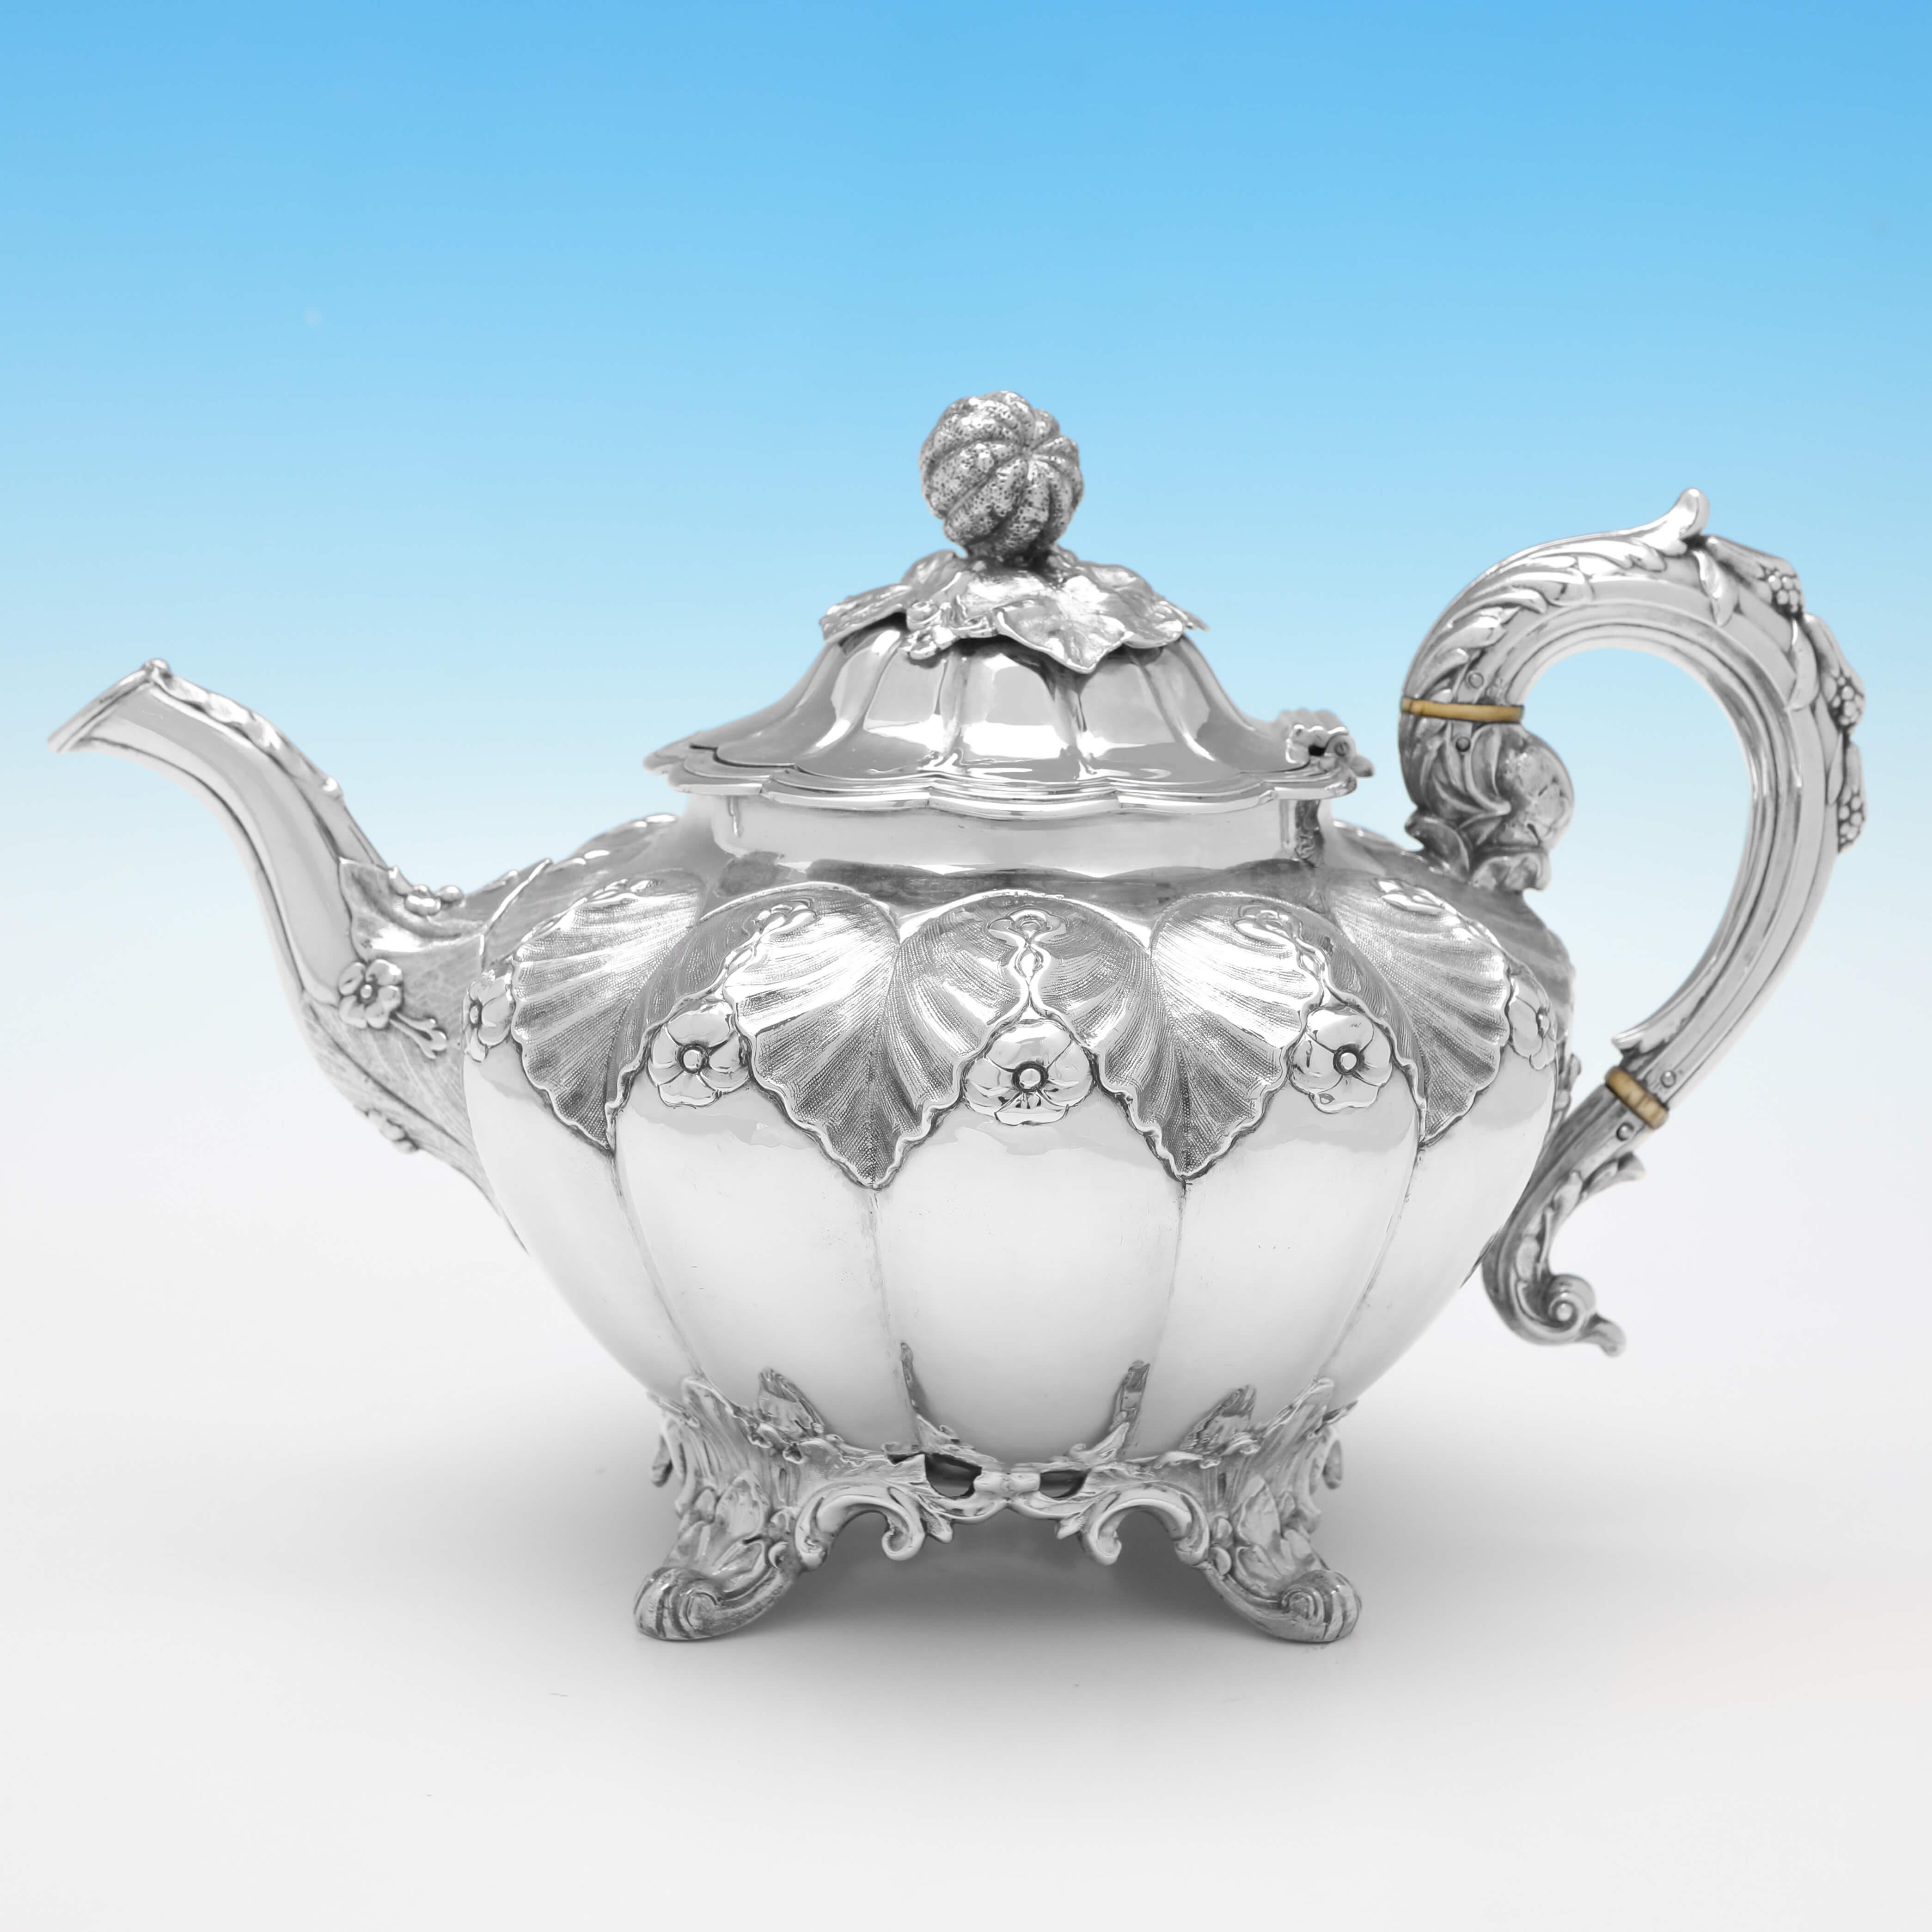 Mid-19th Century Melon Shaped Victorian Antique Sterling Silver Tea & Coffee Set - London 1851 For Sale